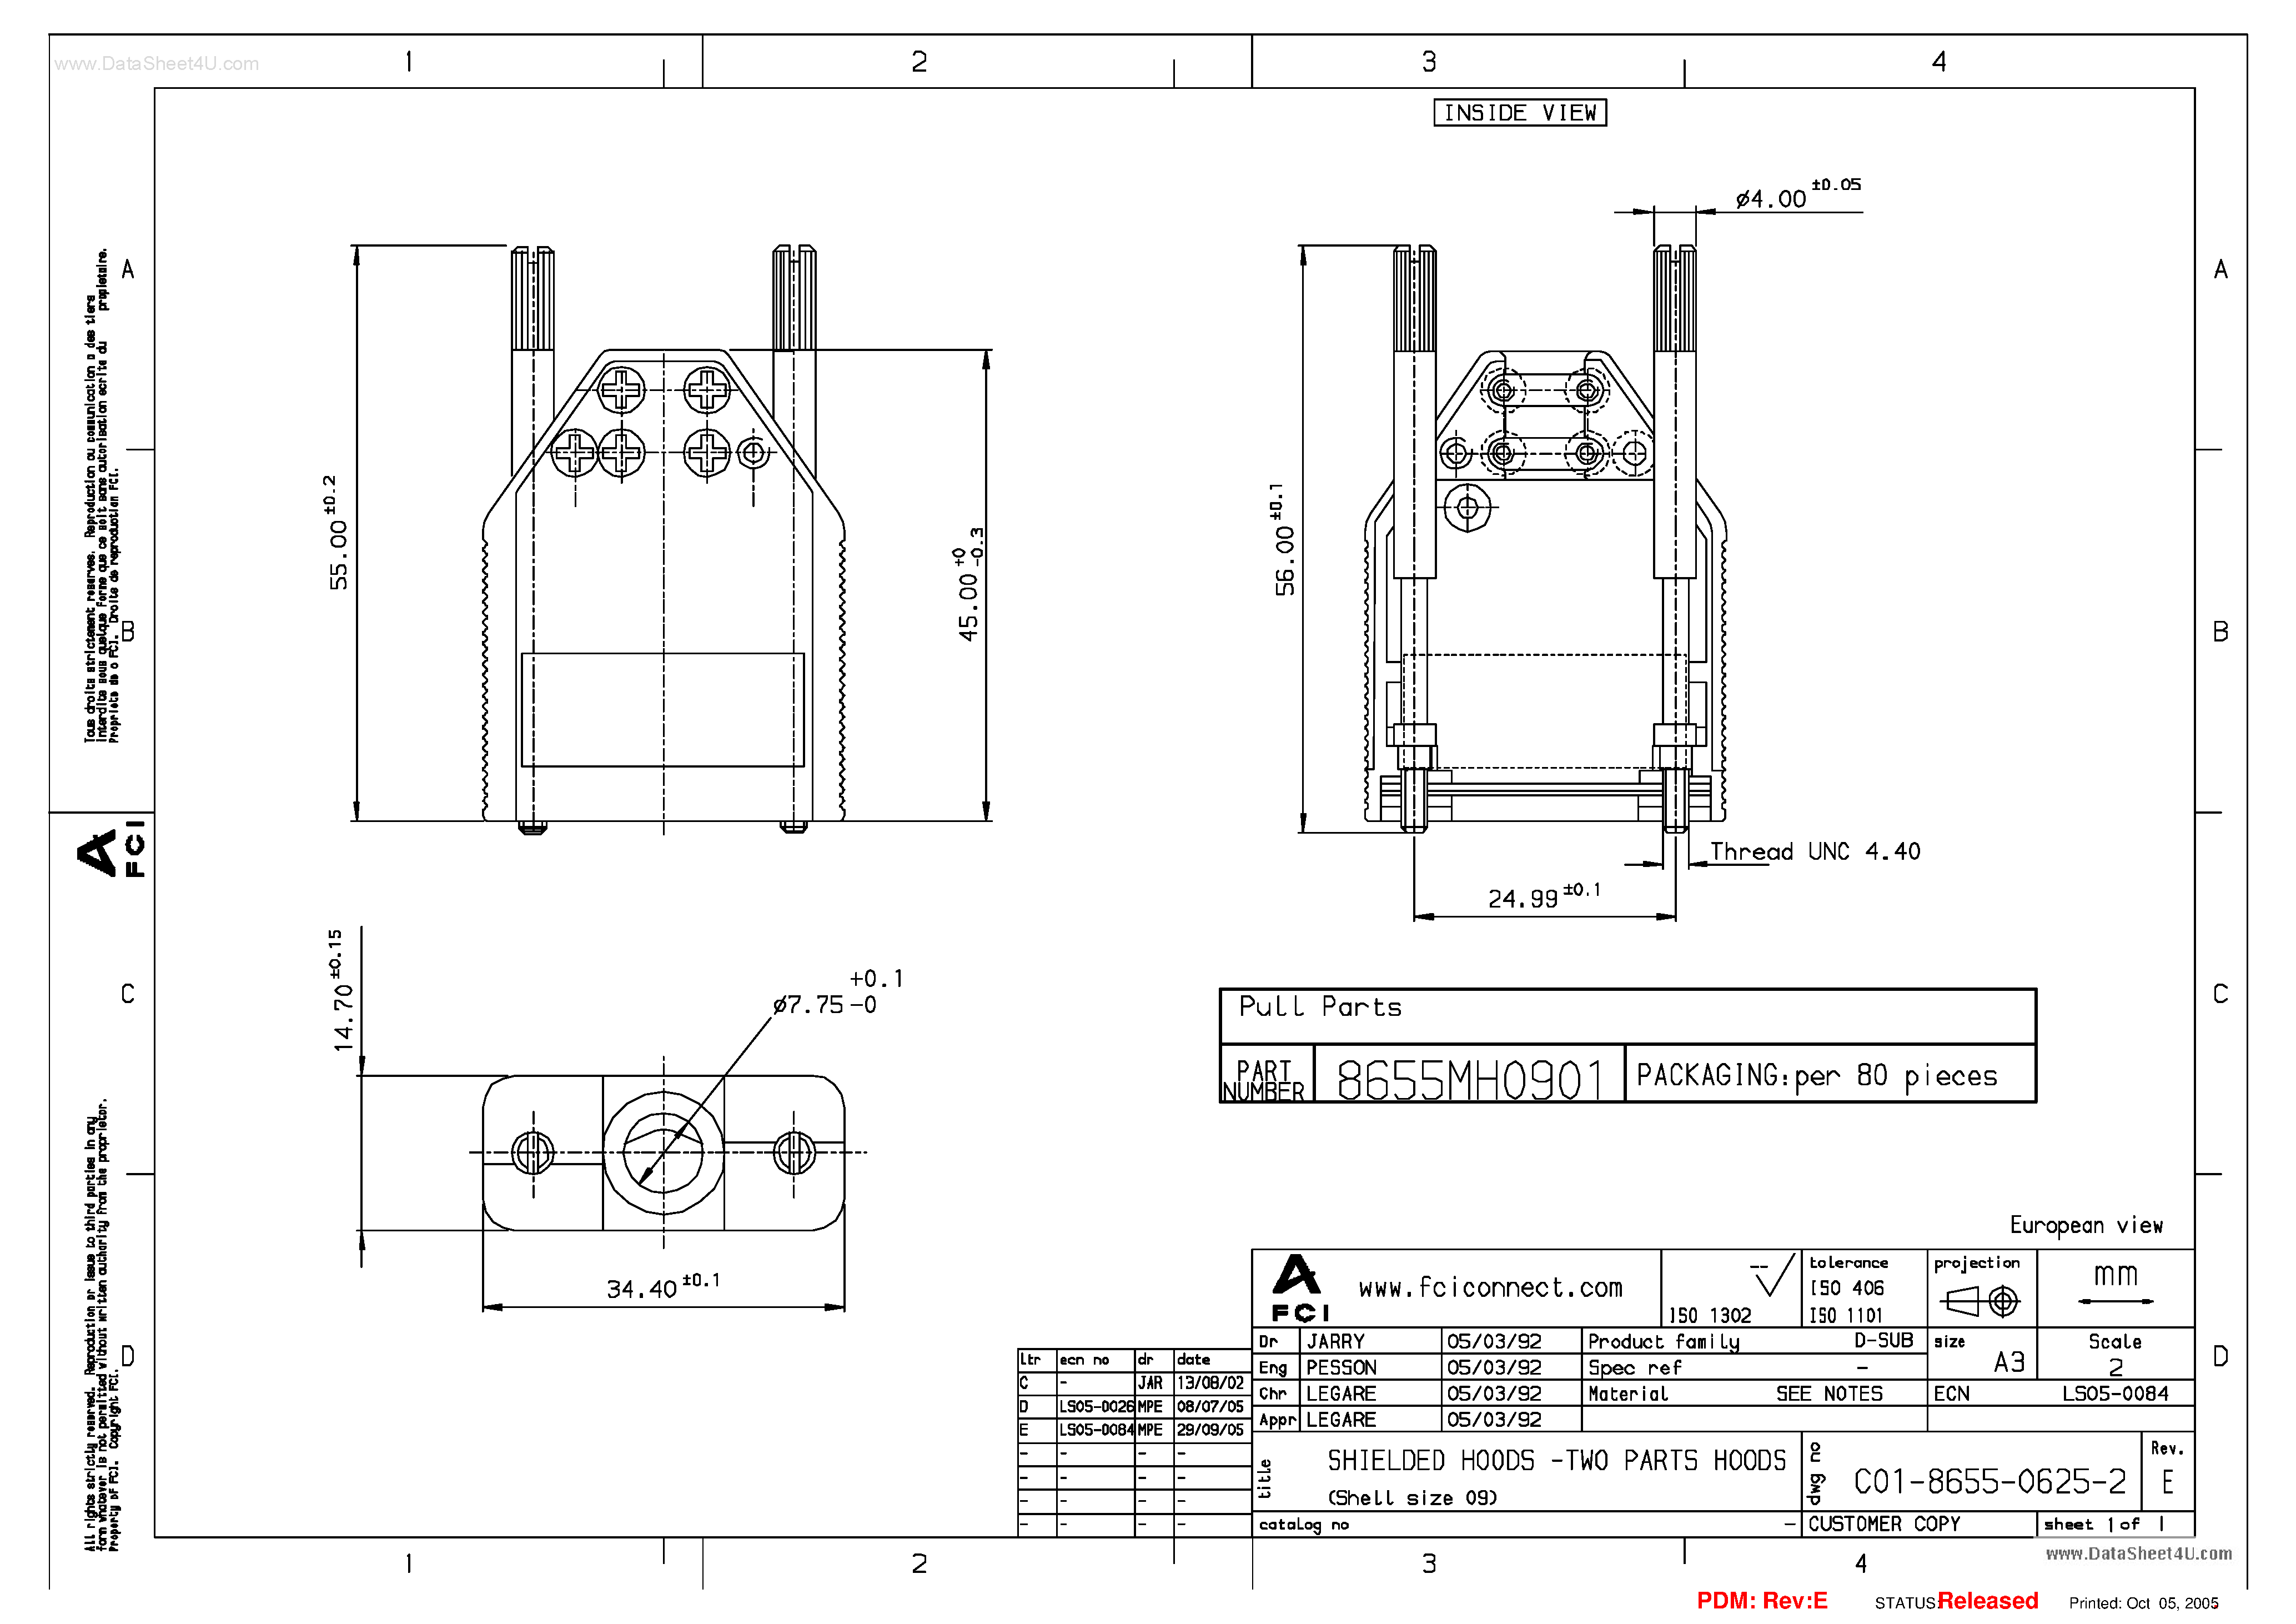 Datasheet 8655MH0901 - SHIELDED HOOD5 - TWO PARTS HOODS page 2